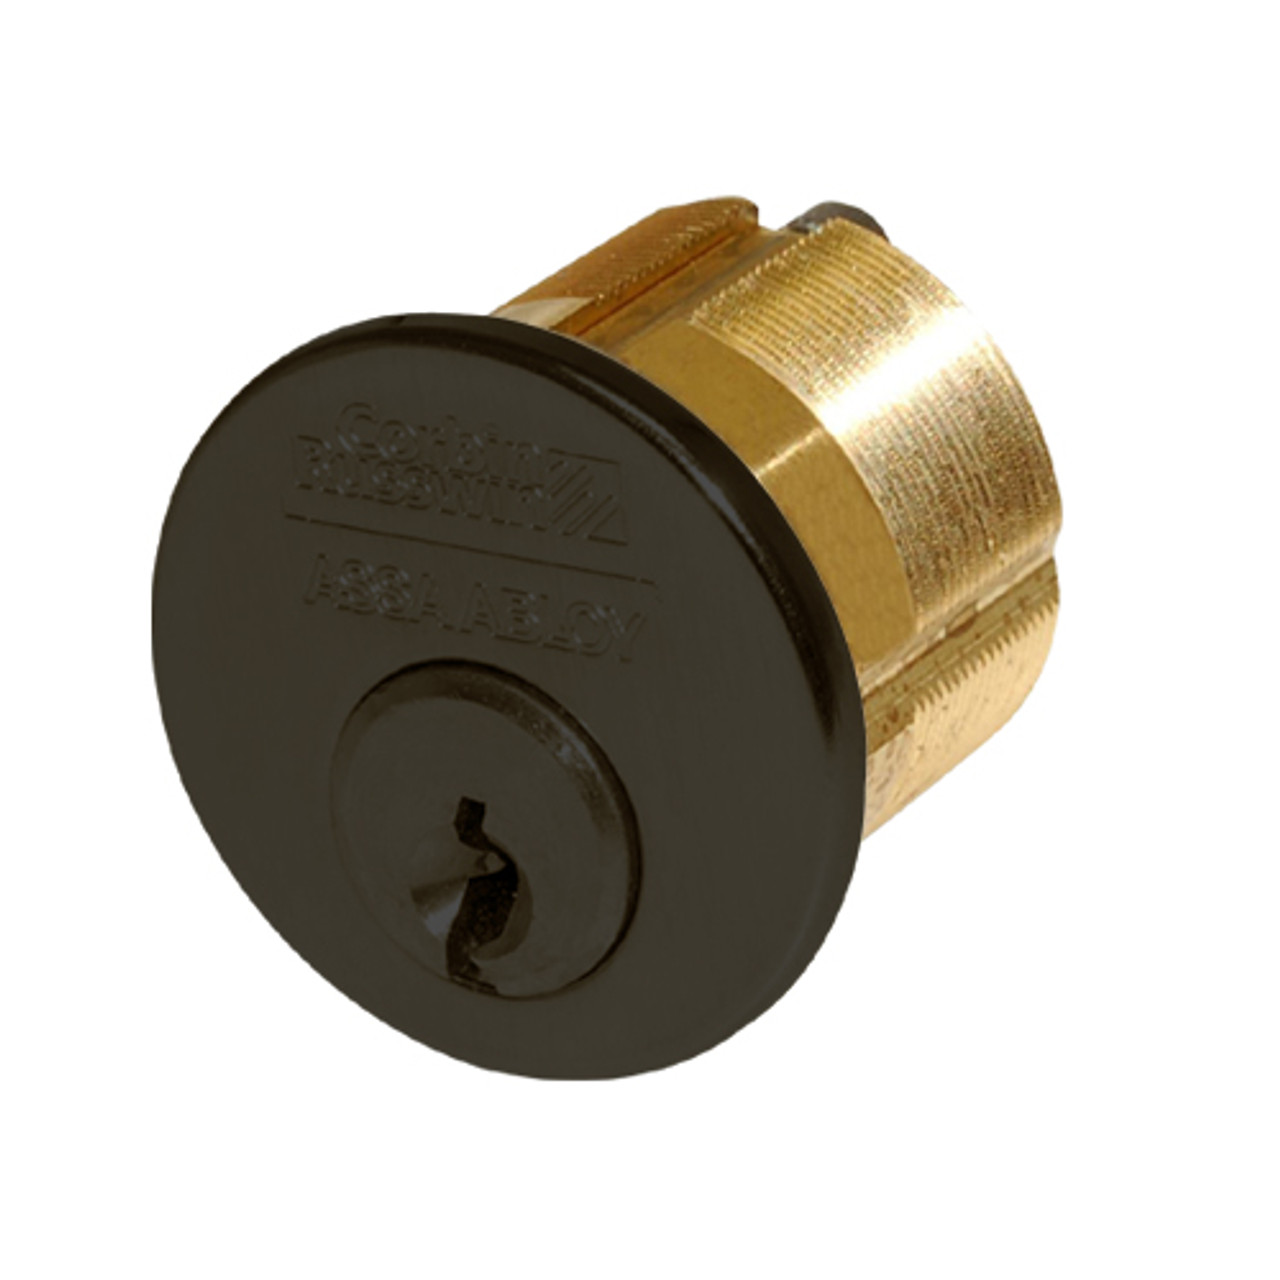 CR1000-118-A04-6-L4-613 Corbin Conventional Mortise Cylinder for Mortise Lock and DL3000 Deadlocks with DL4000 Deadlock Cam in Oil Rubbed Bronze Finish